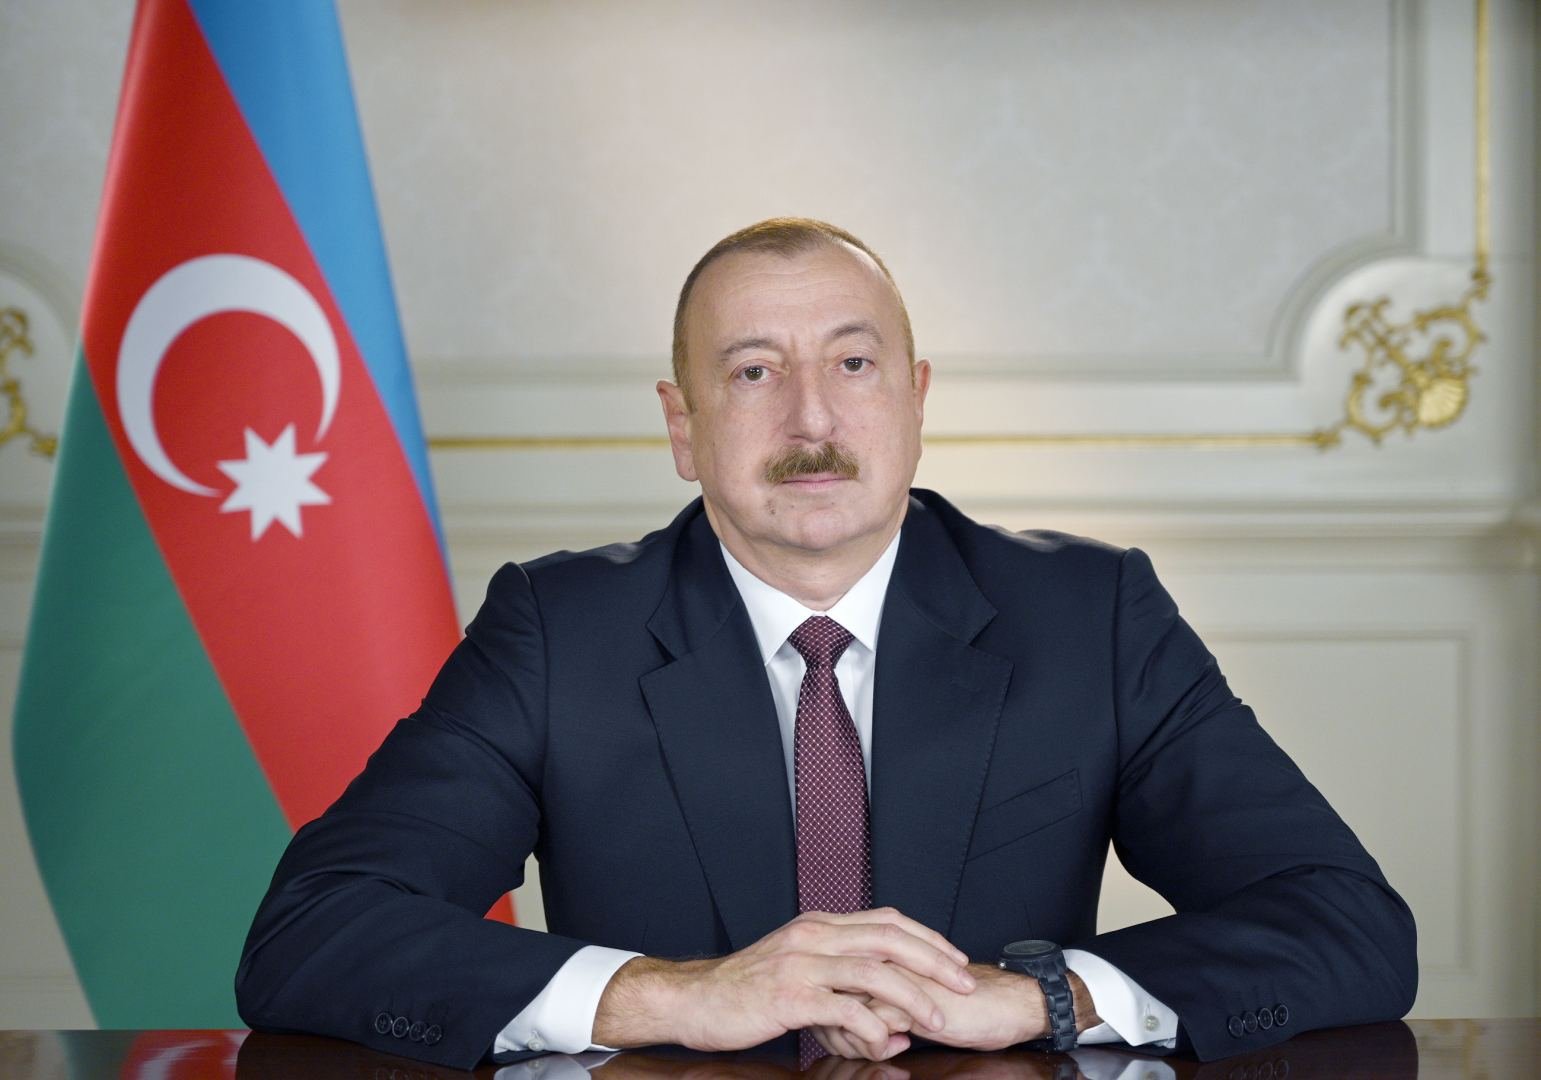 Latest statements and actions taken by U.S. seriously damaged Azerbaijan-U.S. relations - President Ilham Aliyev